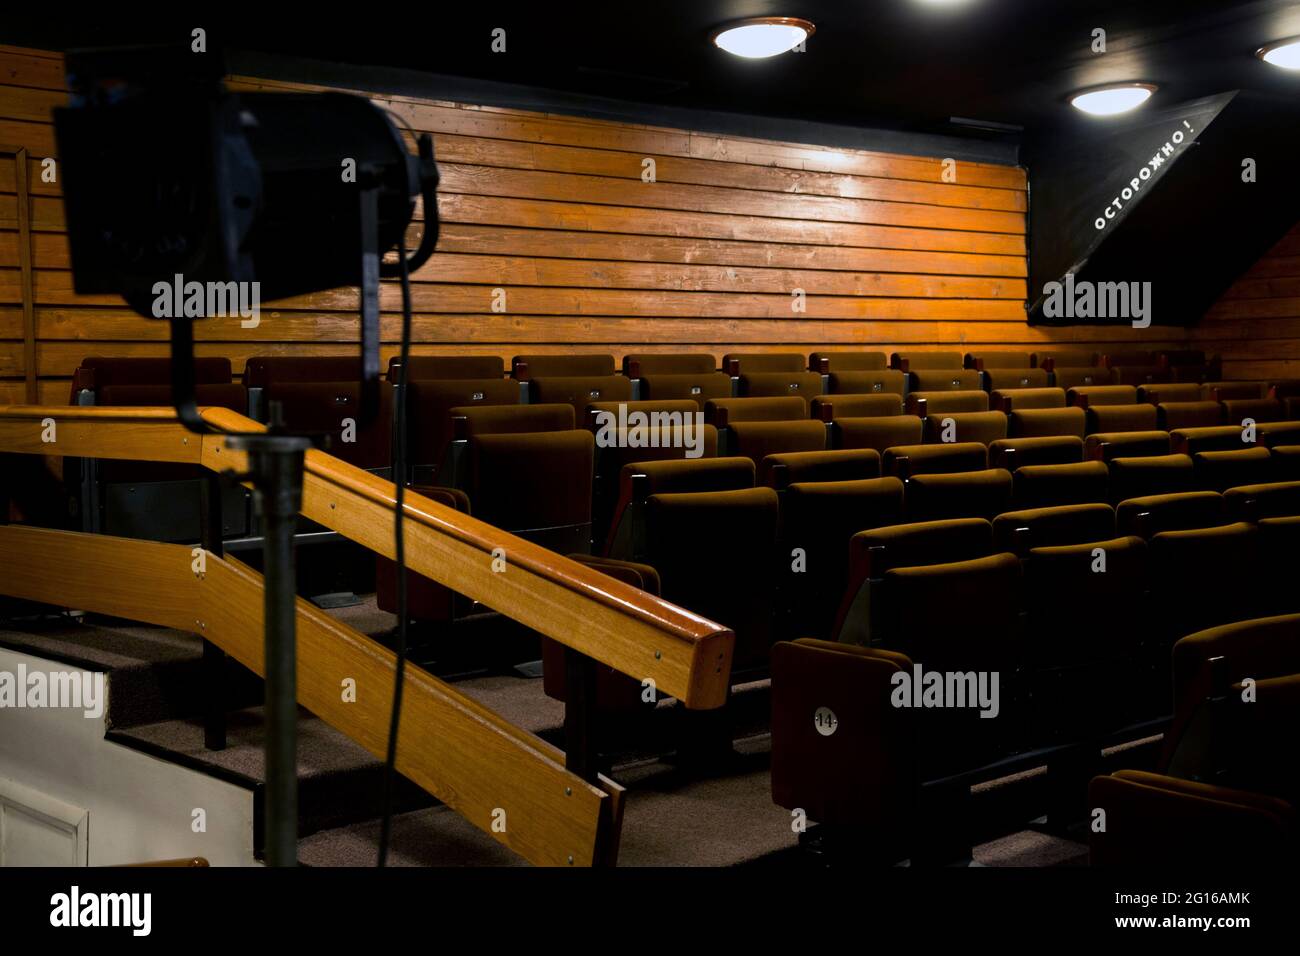 Moscow, Russia. 14th of February, 2014 Chairs in the stalls of the auditorium of the Taganka Theater in Moscow, Russia Stock Photo